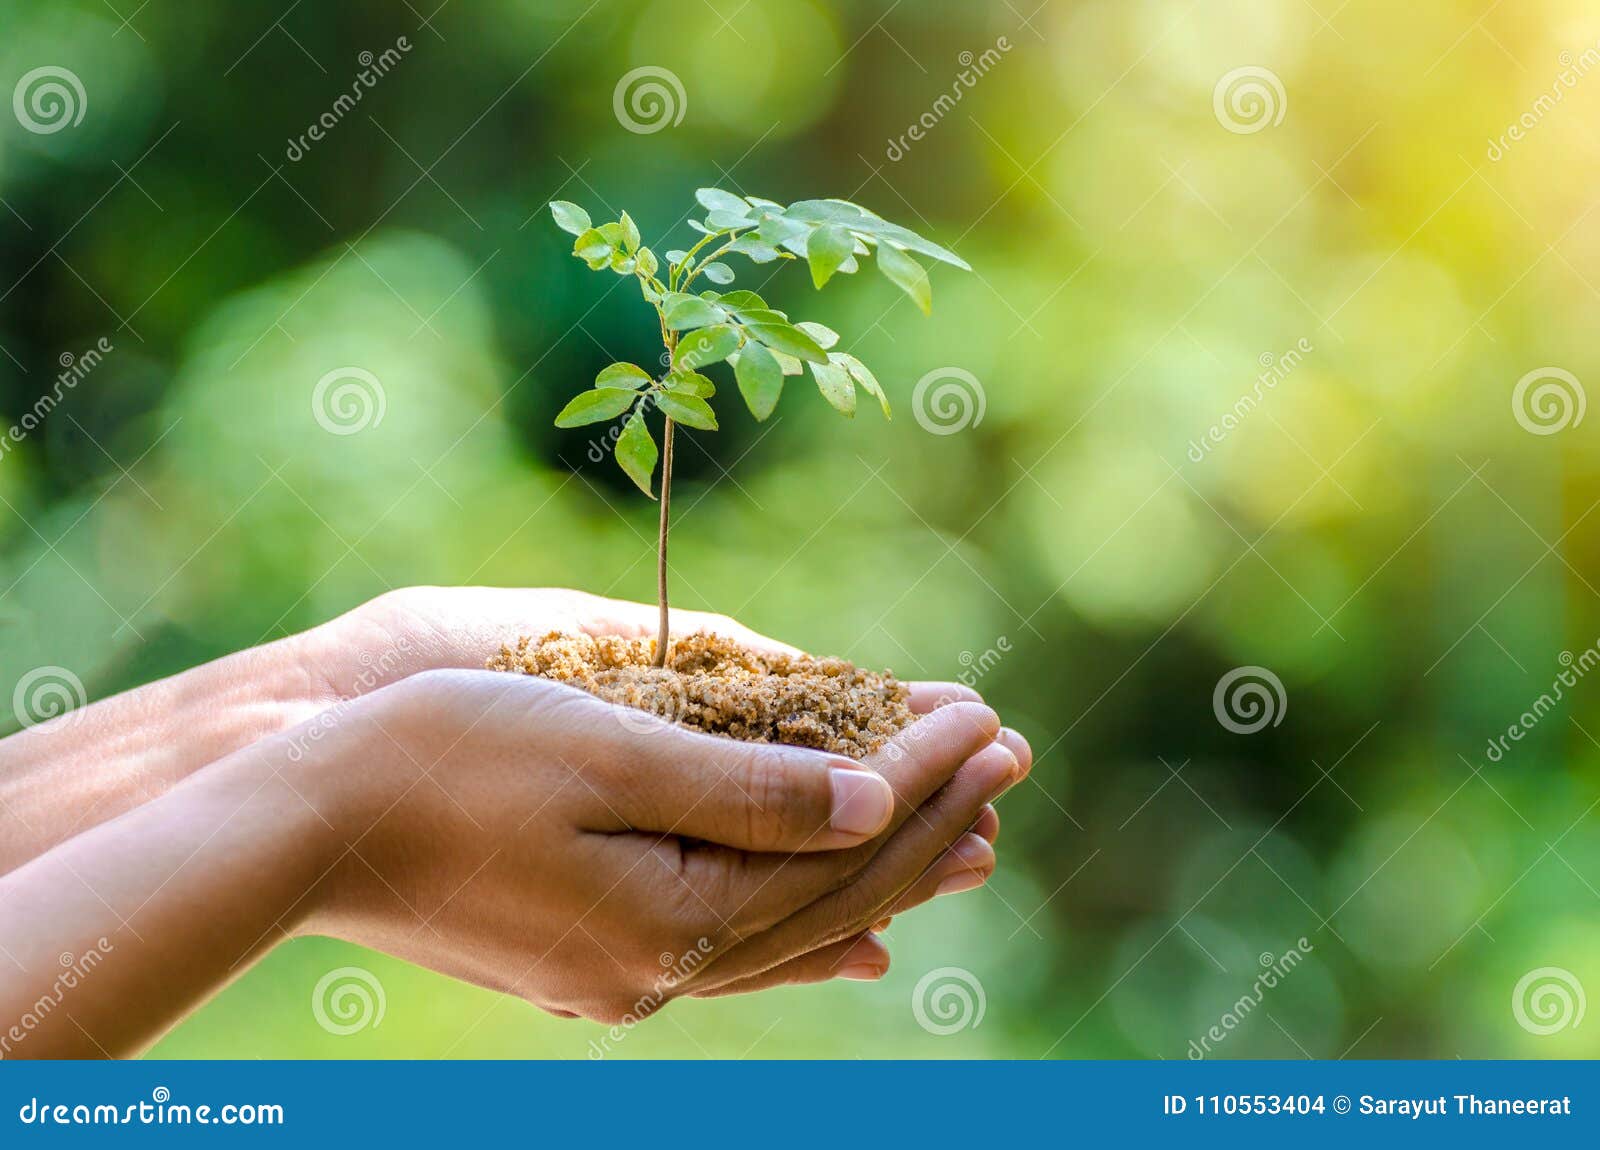 in the hands of trees growing seedlings bokeh green background female hand holding tree nature field grass forest conservation